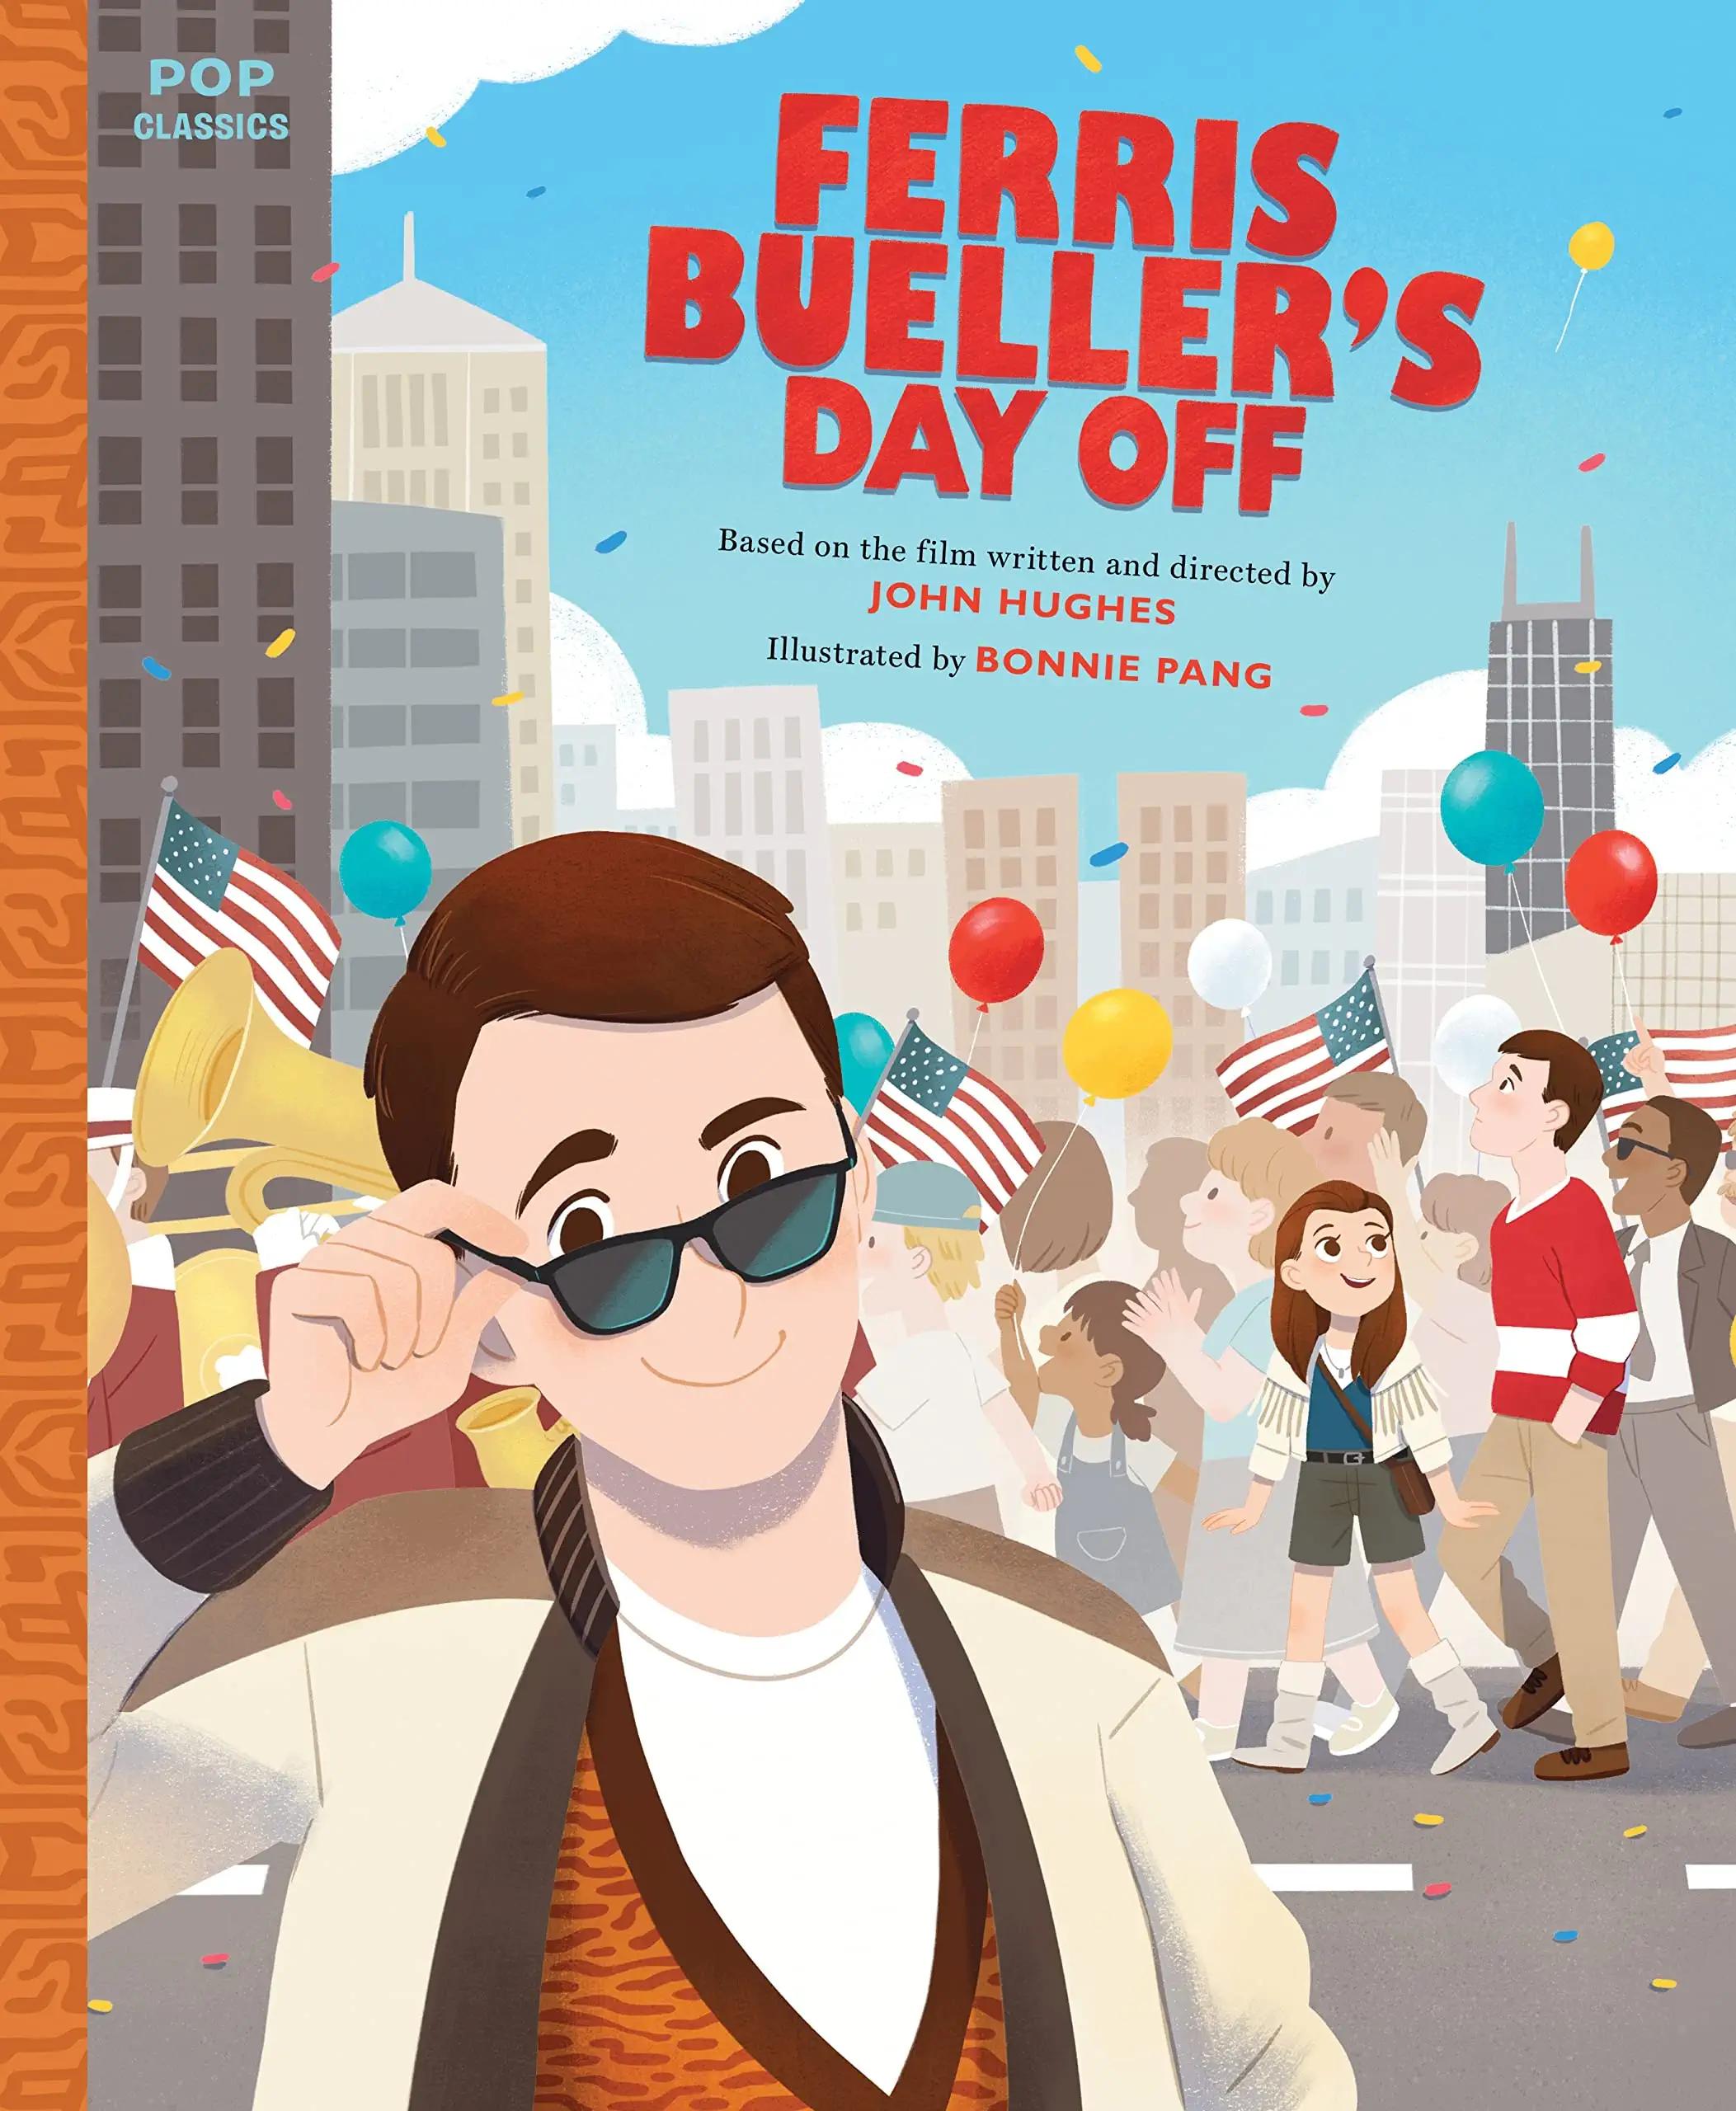 Ferris Bueller's Day Off Classic Illustrated Storybook Soft Cover